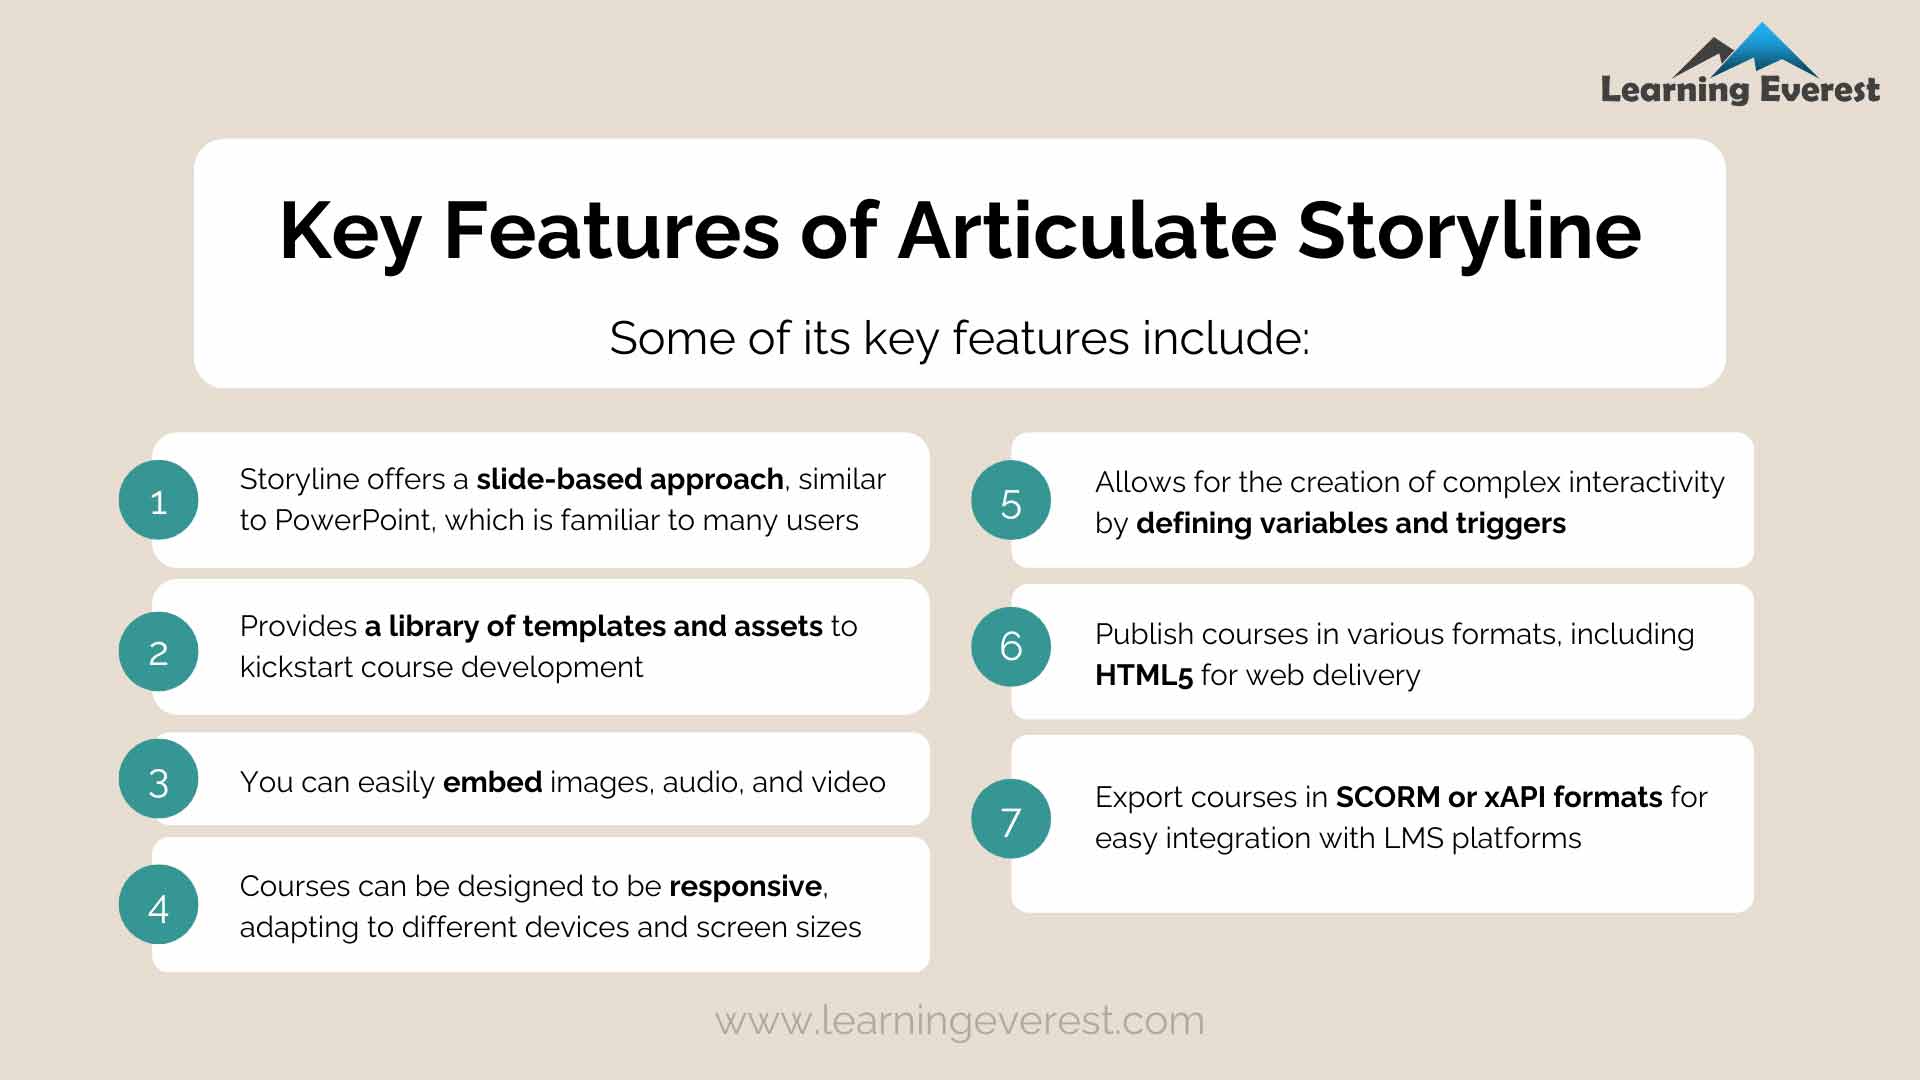 Key Features of Articulate Storyline